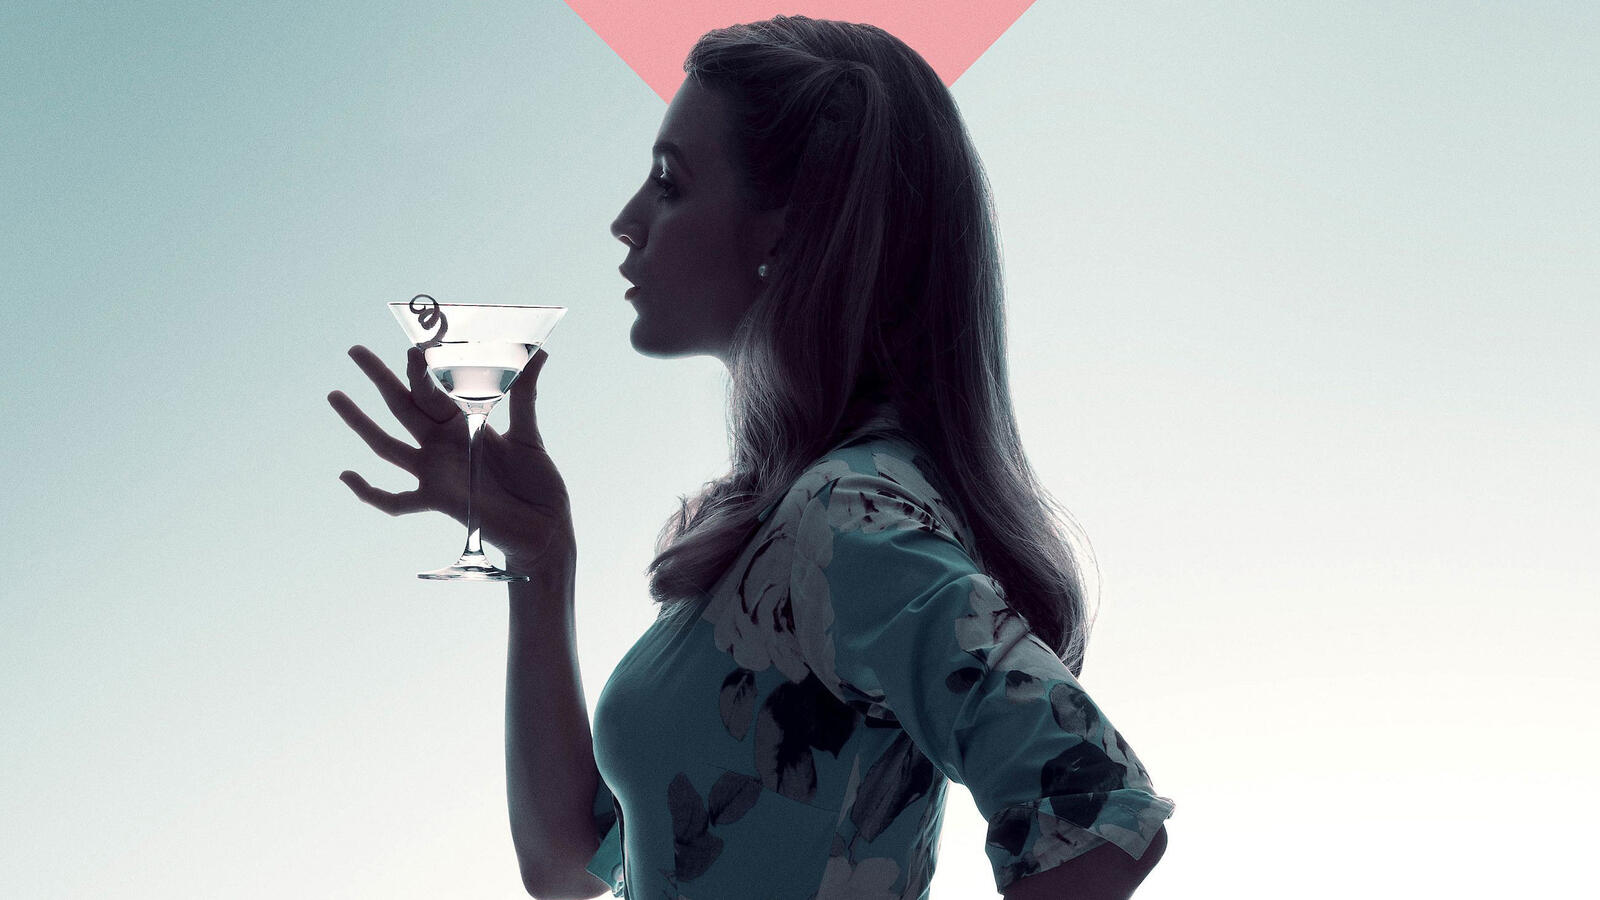 Wallpapers A Simple Favor movies 2018 movies on the desktop